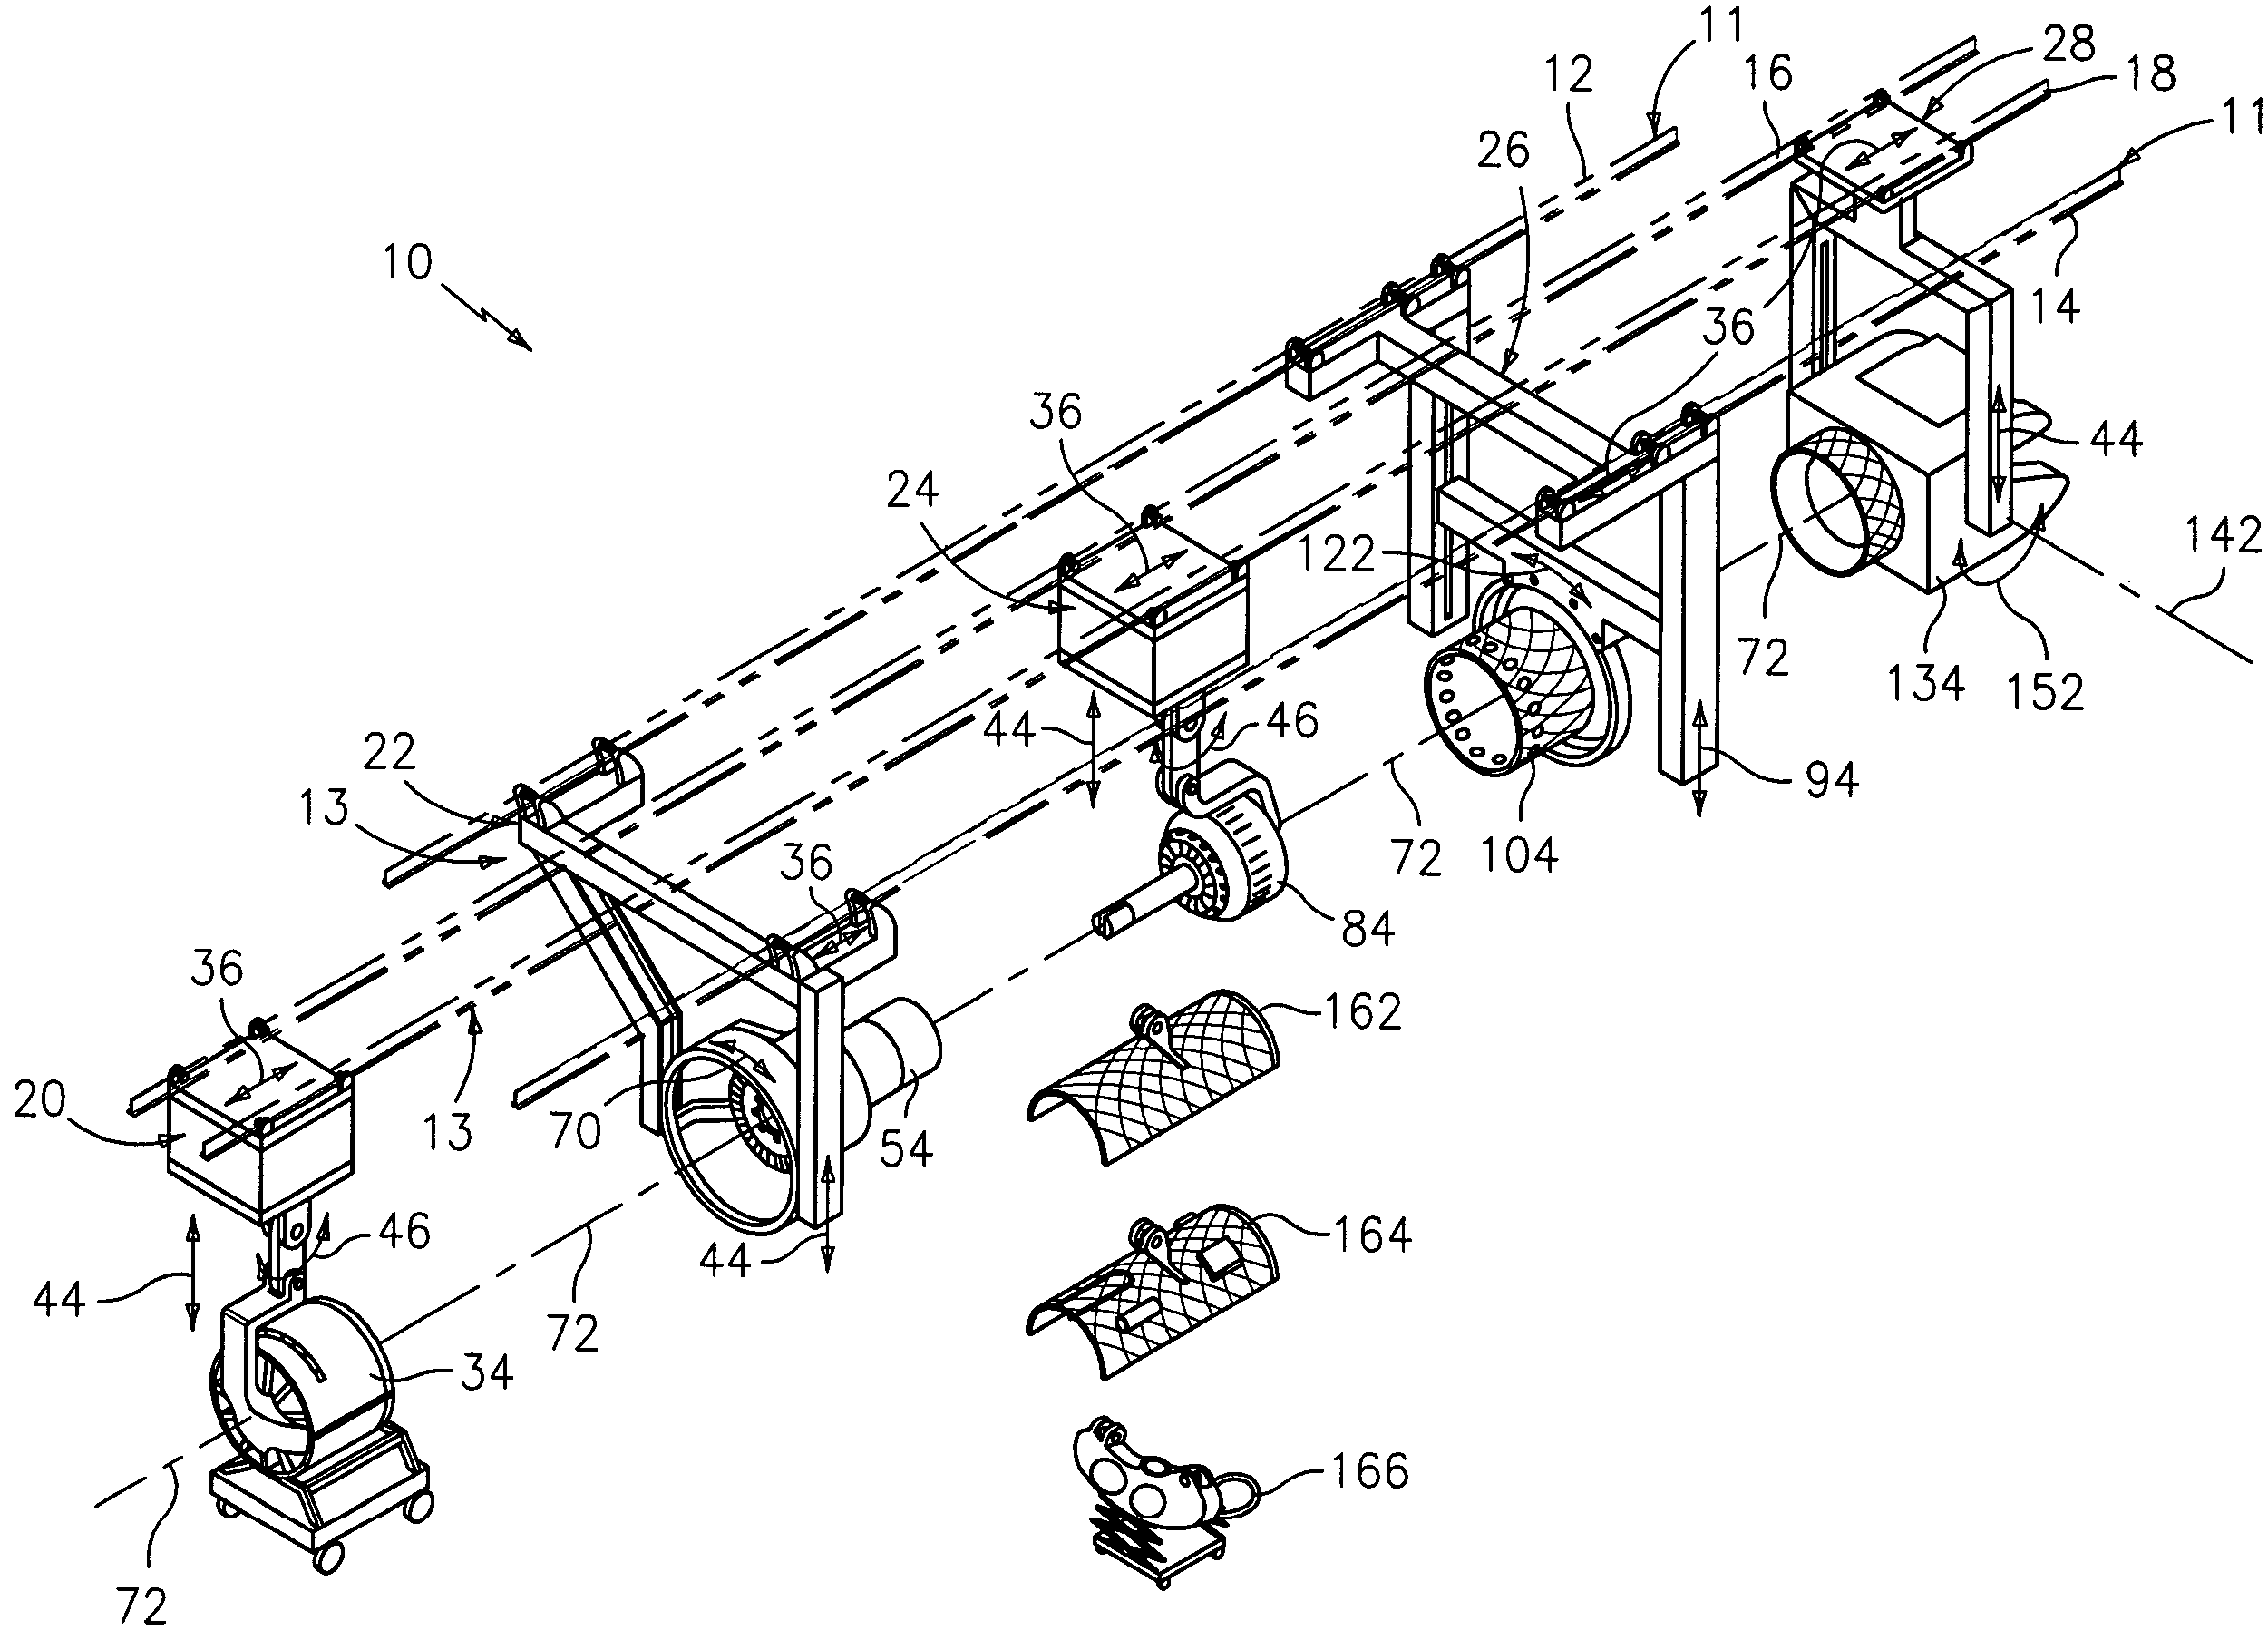 Apparatus and method for quadrail ergonomic assembly